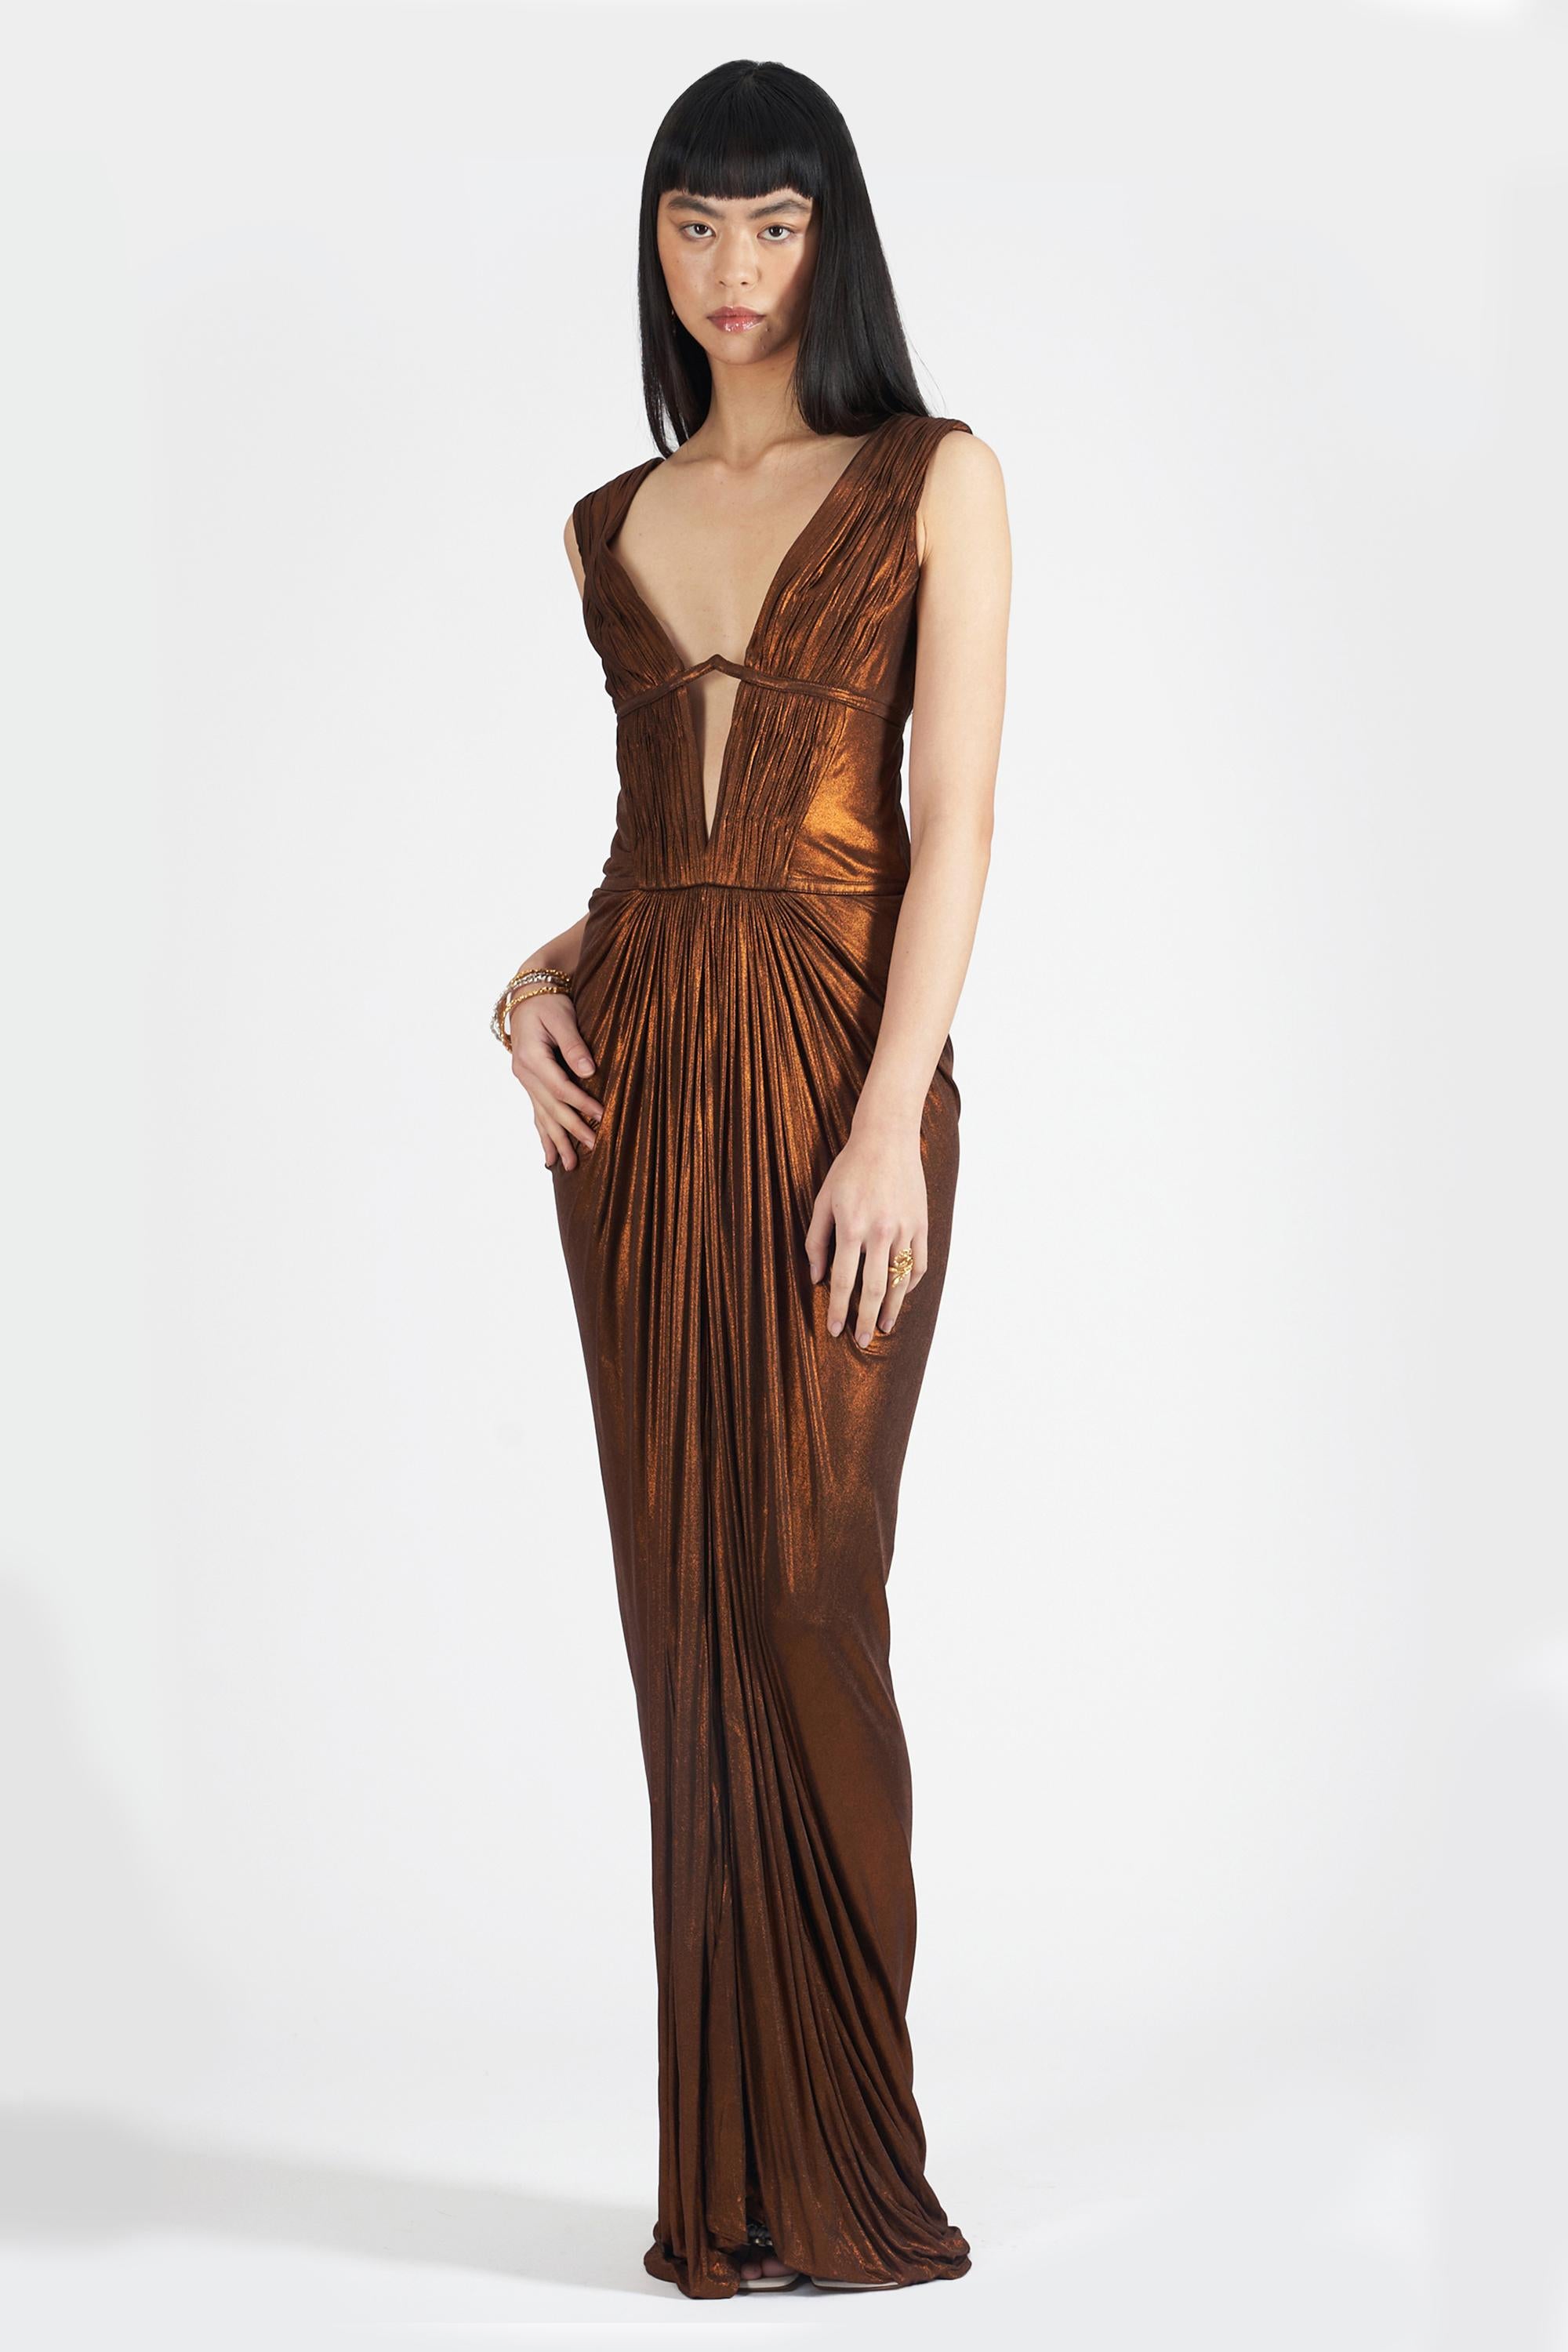 We are excited to present this 2007 Roberto Cavalli Fall Winter metallic gown. Features low cut neck, cut out detail, ruching detail, low back, zip closure and maxi length with tags. In great vintage condition, a few minor discolouration marks to